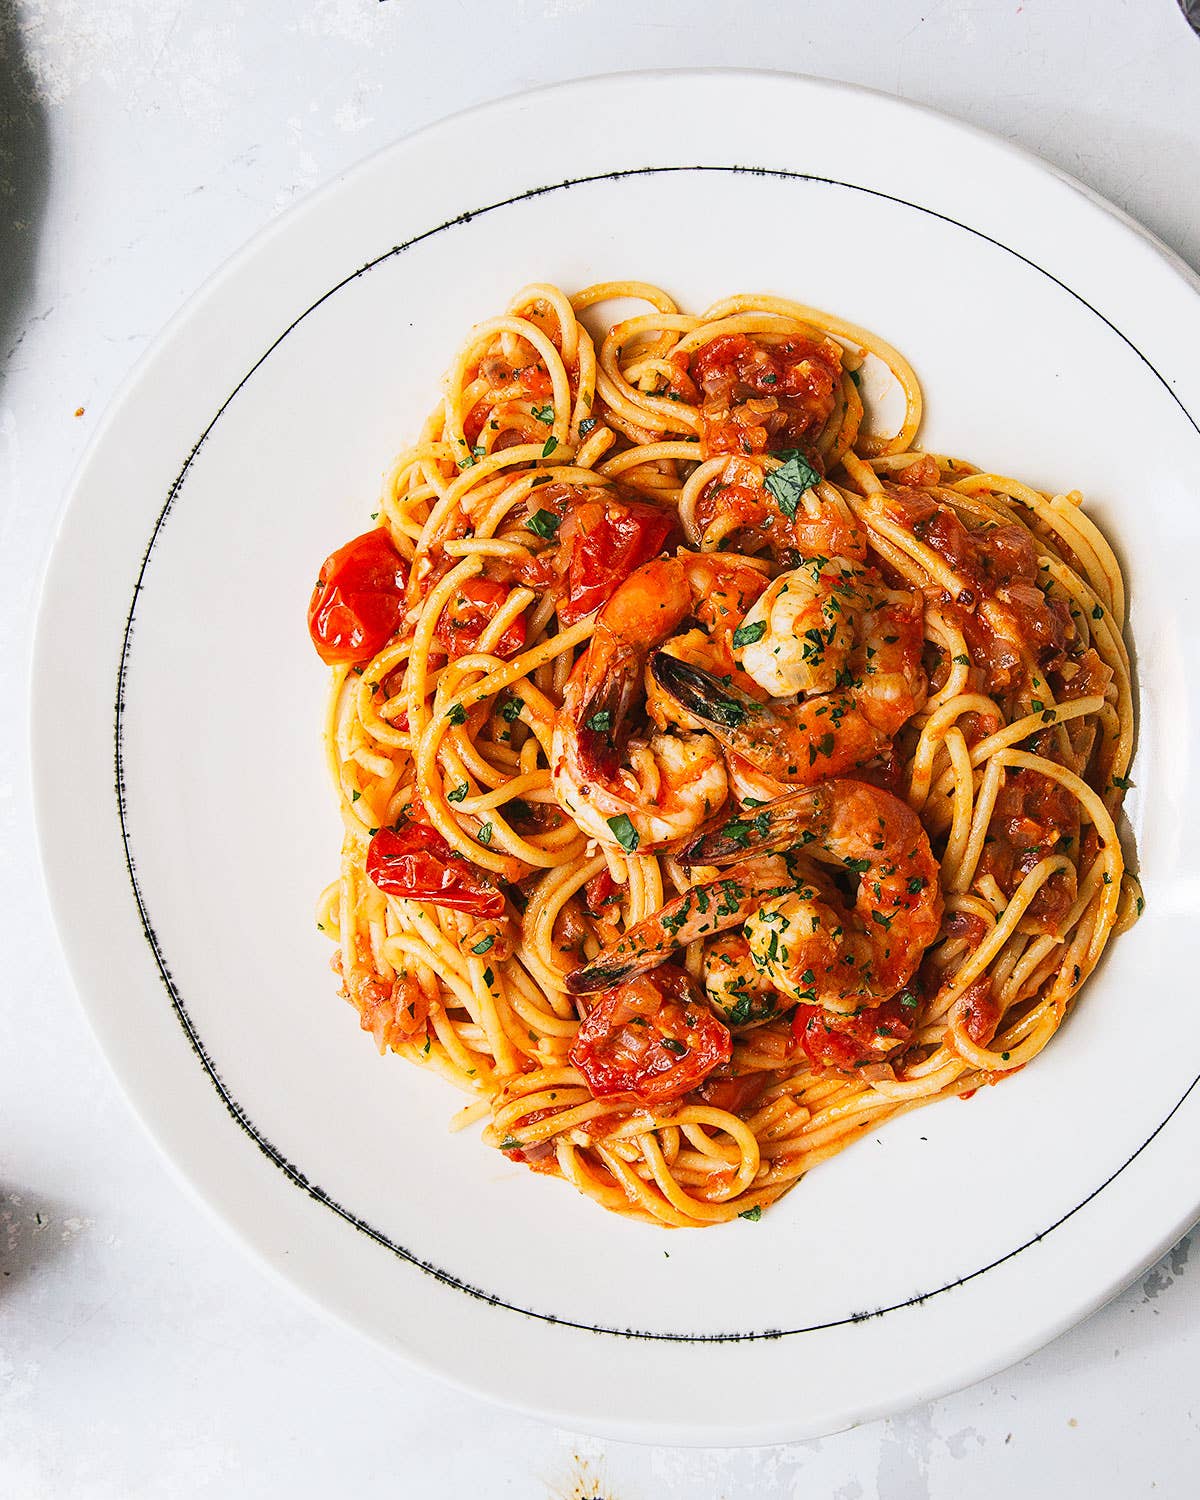 Our Best Tomato Sauce Recipes To Use Up Your Jar of Tomato Paste